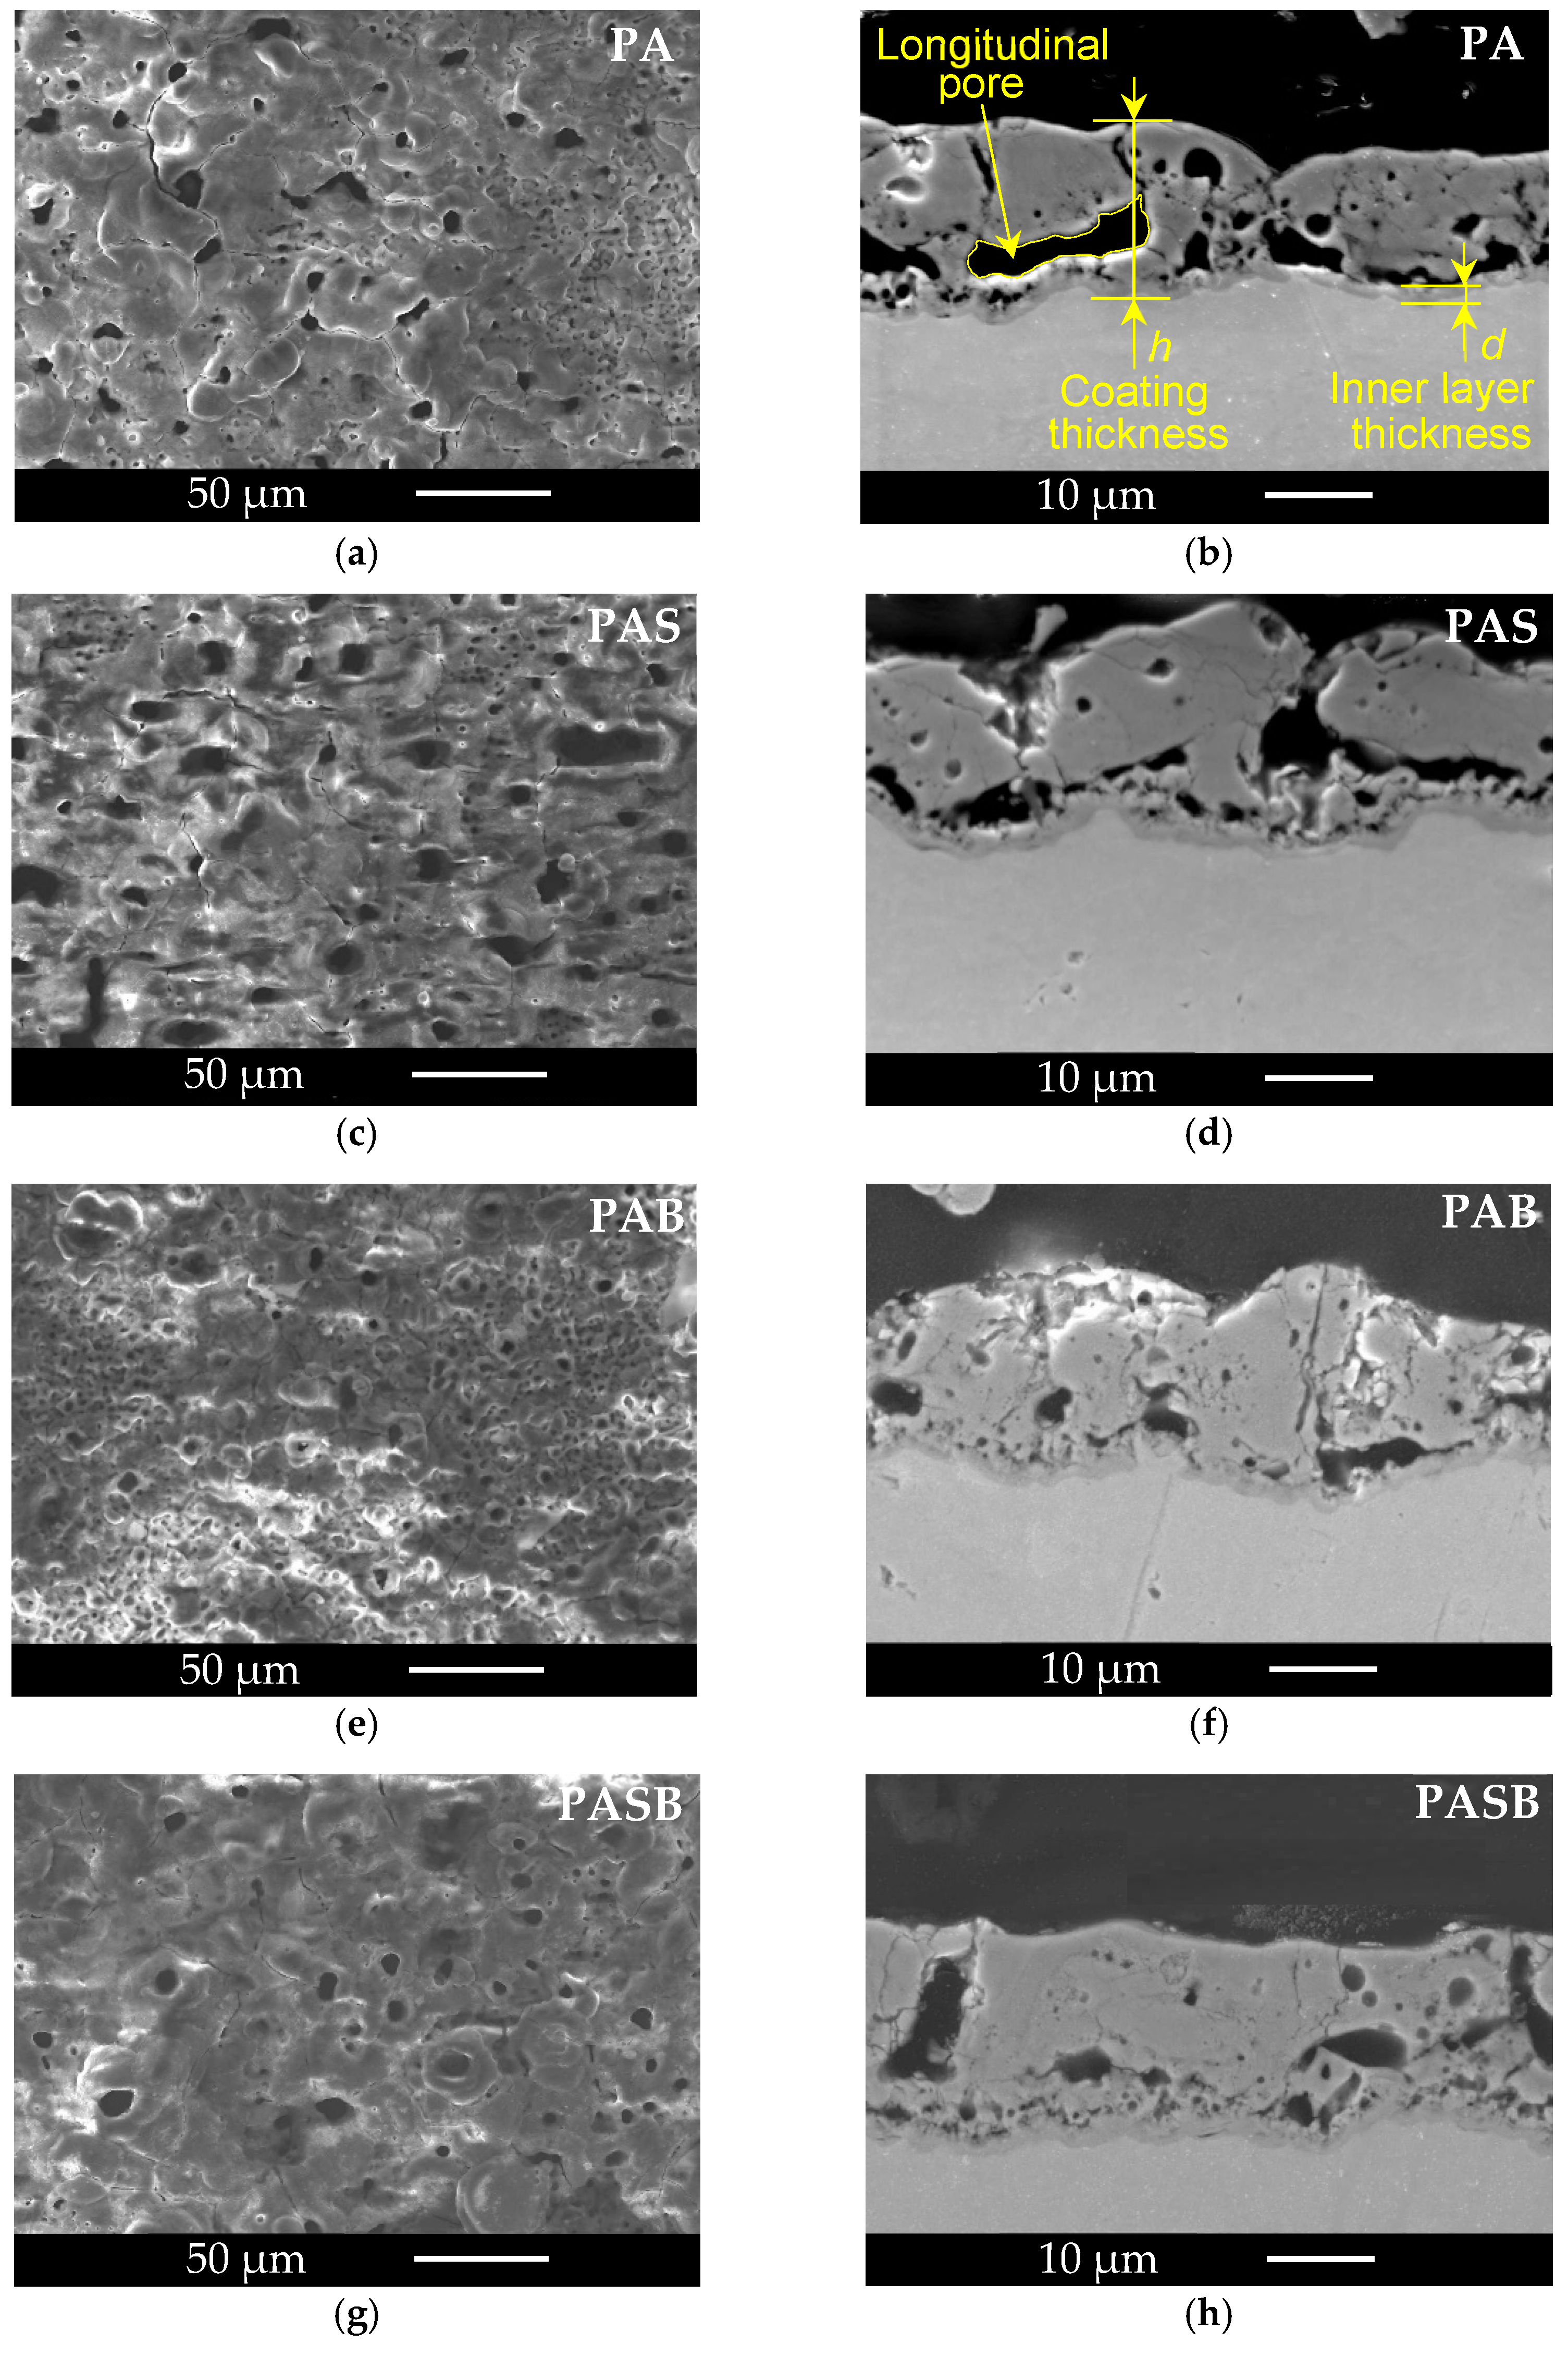 Materials Free Full Text Plasma Electrolytic Oxidation Of Zr 1 Nb Alloy Effect Of Sodium Silicate And Boric Acid Addition To Calcium Acetate Based Electrolyte Html